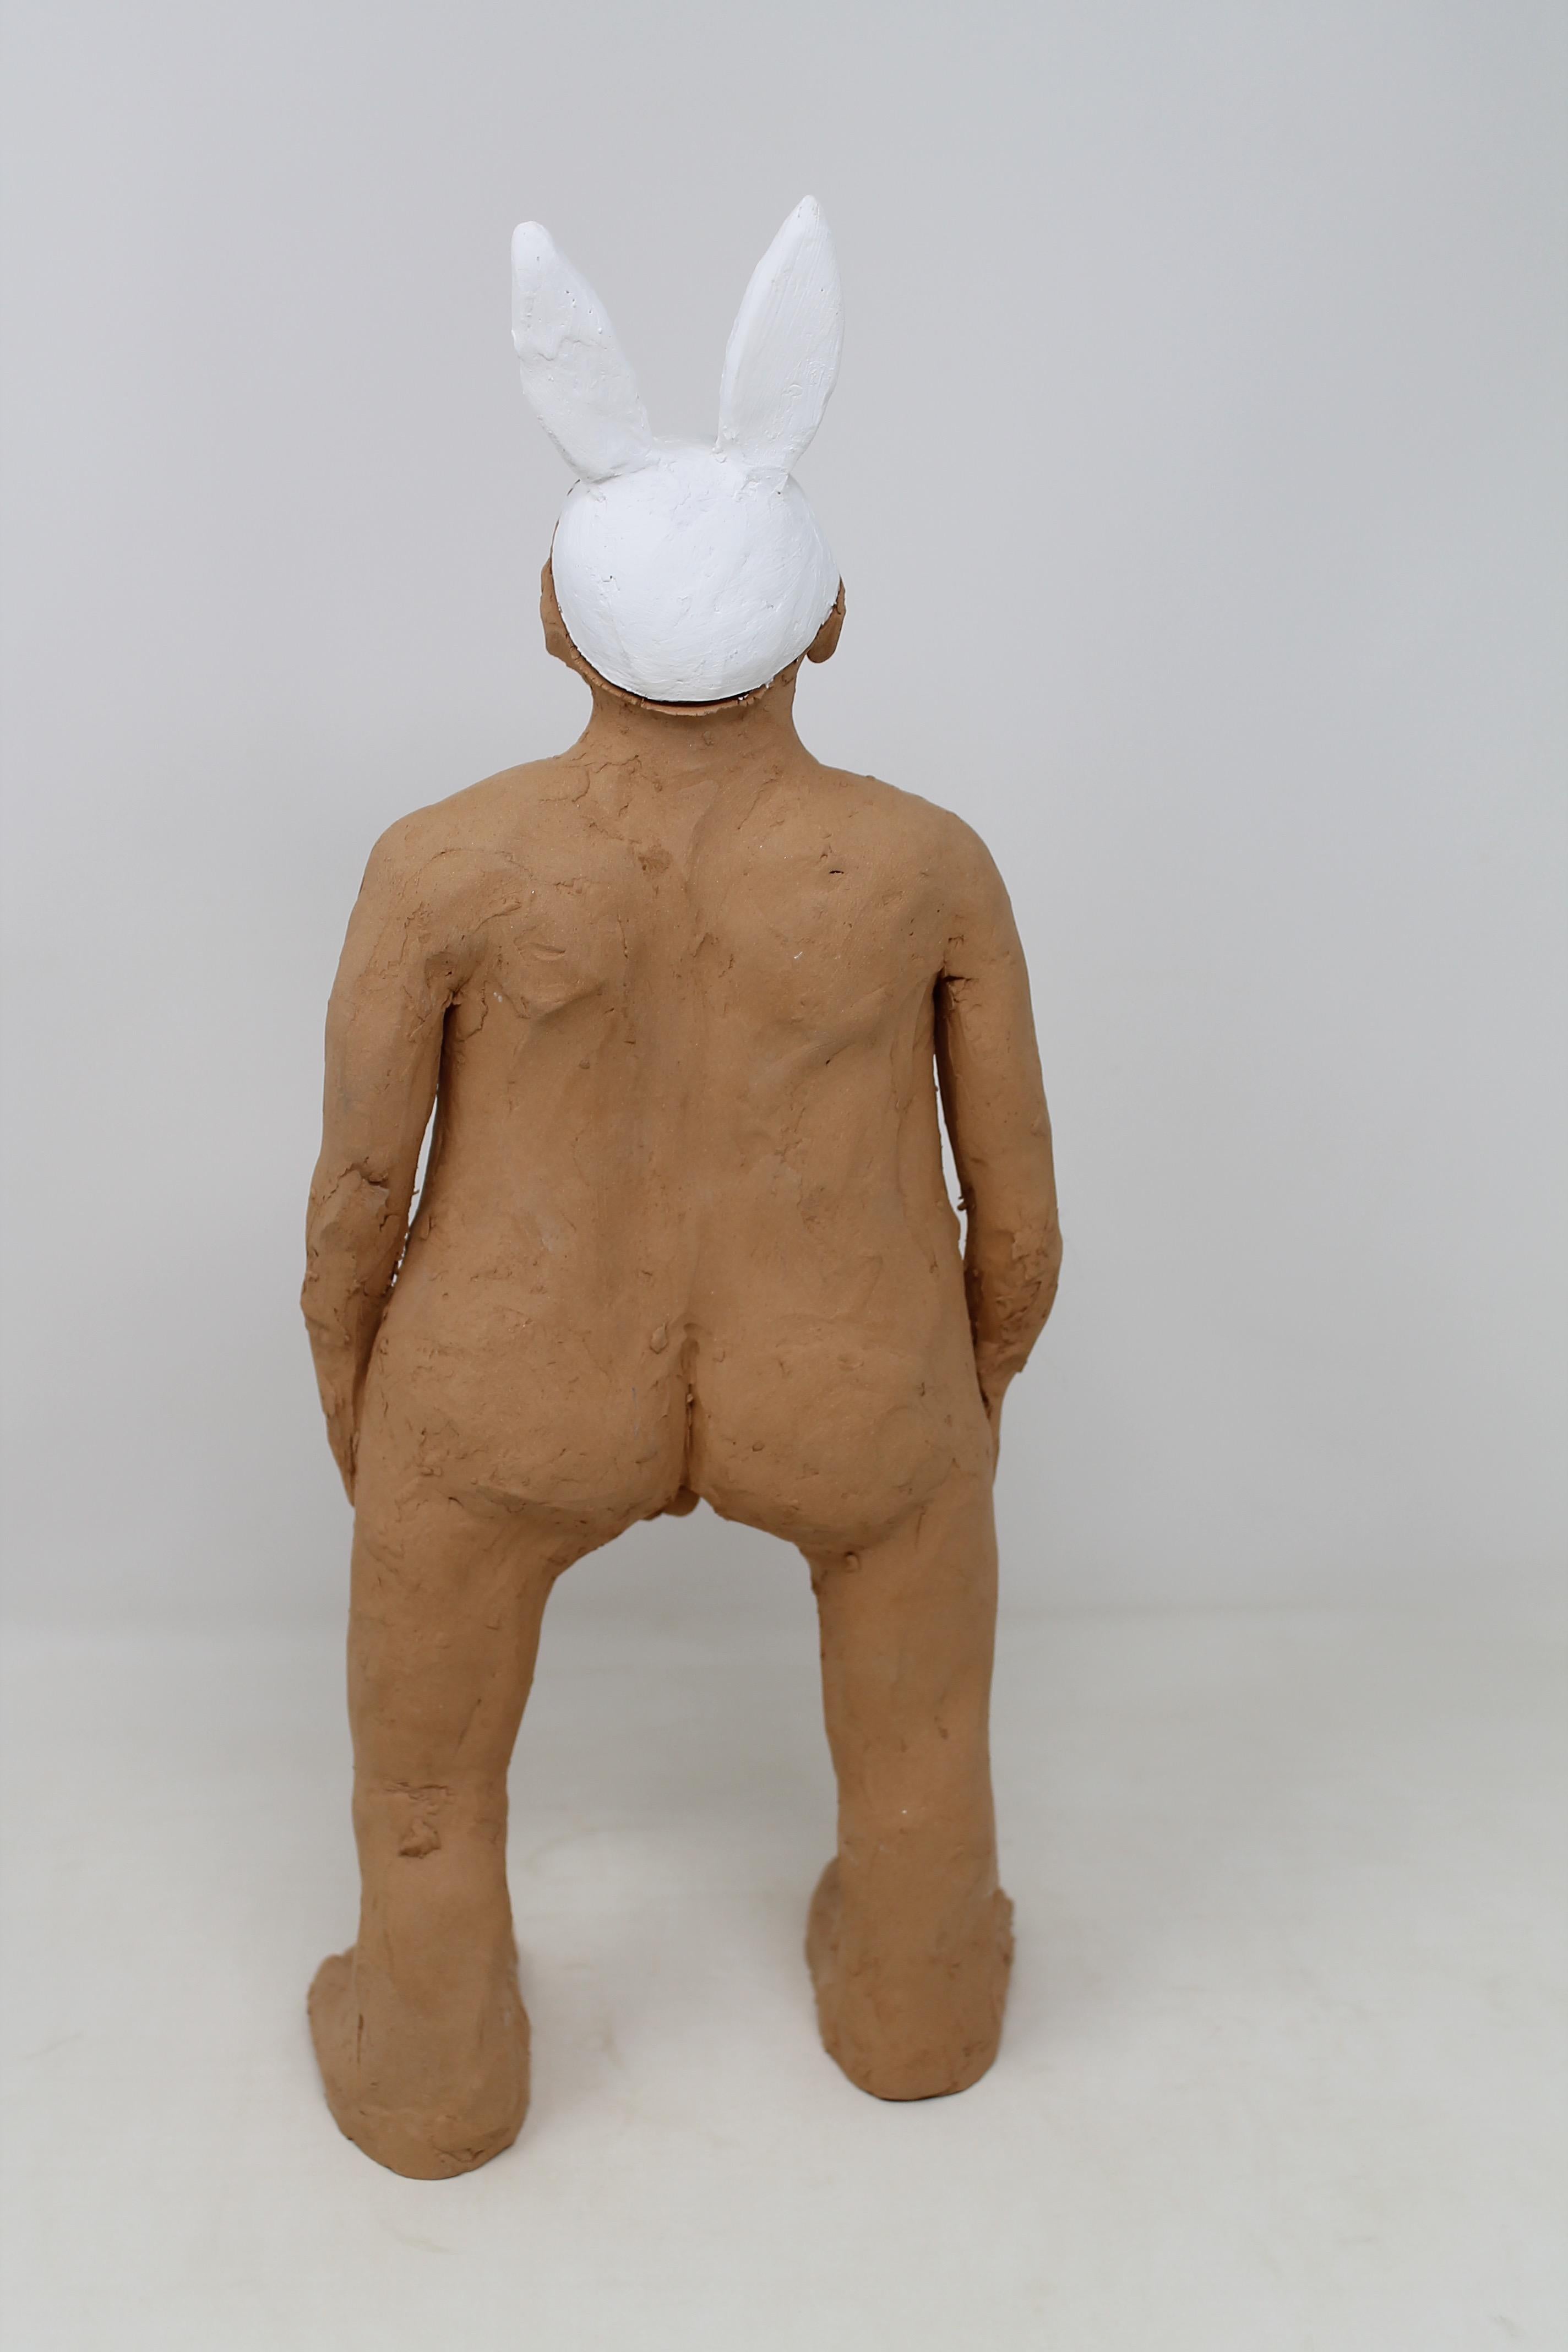 Italian Freaklab Big Humans Made Entirely by Hand in Terracotta, Man-Rabbit For Sale